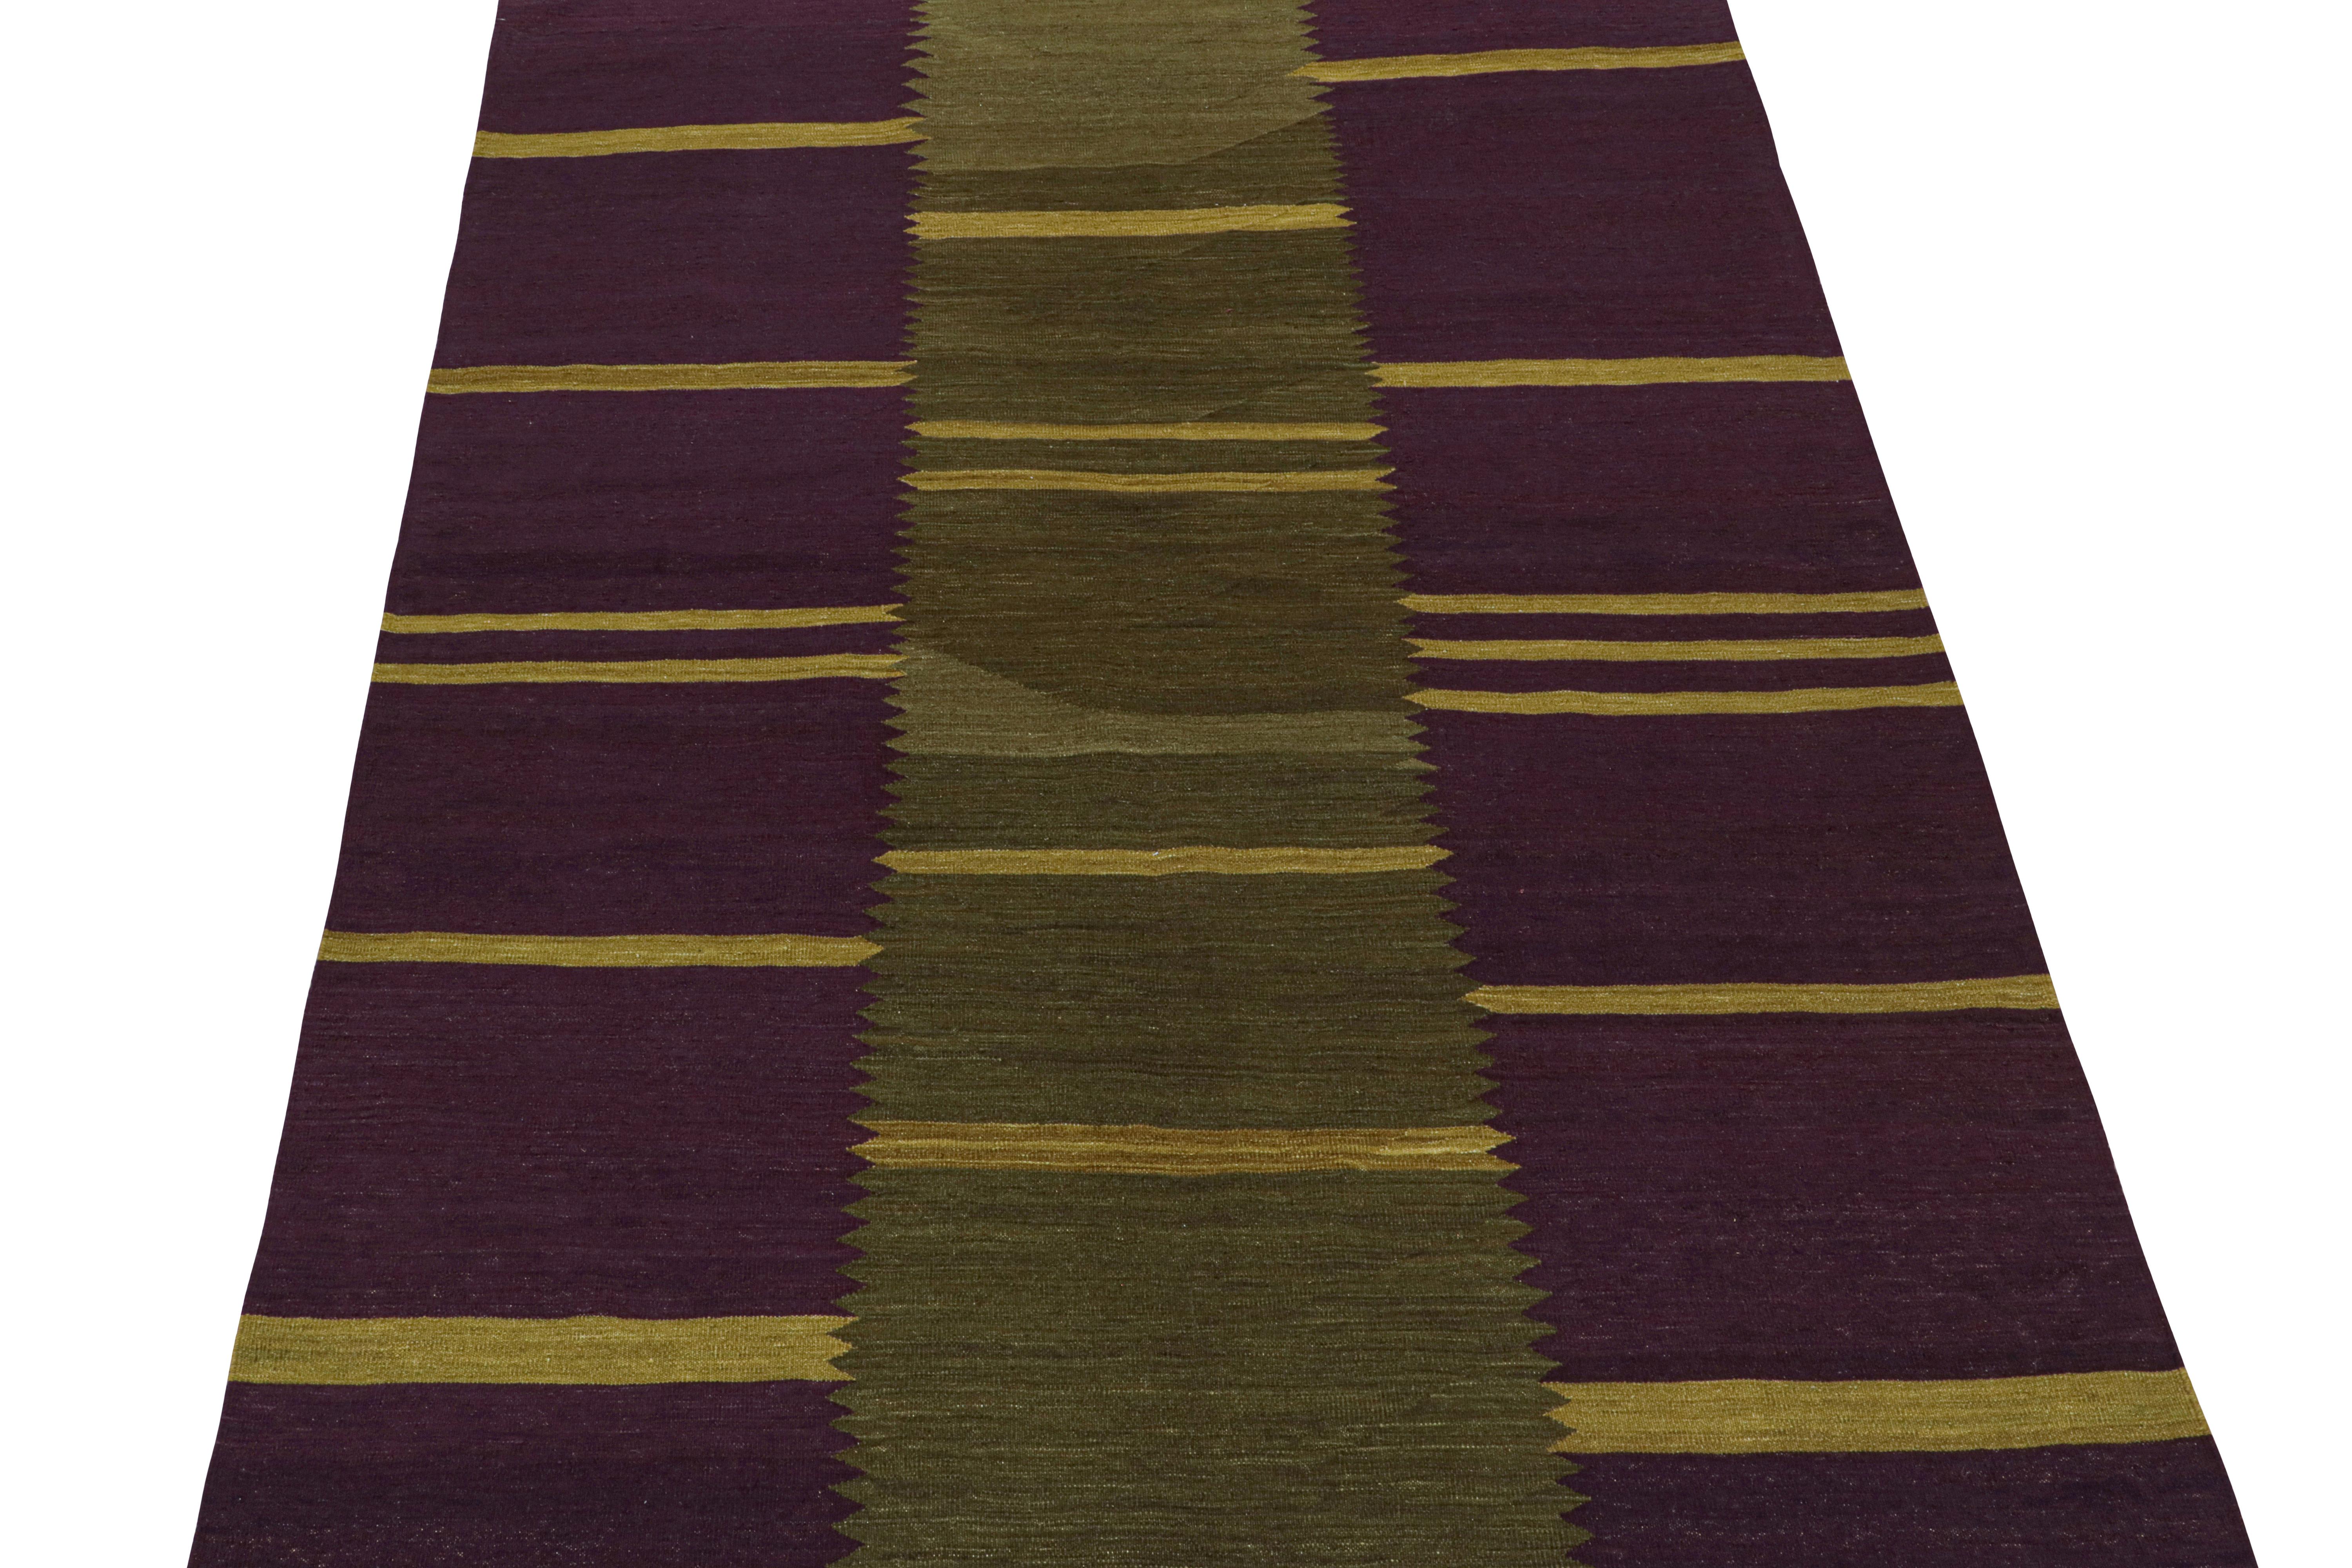 This contemporary 7x10 kilim rug is from an exciting new collection in Rug & Kilim's modern flat weaves. 

On the Design: 

Handwoven in wool, this new style of our “Rez” Collection enjoys an almost abstract minimalist sensibility in its design.